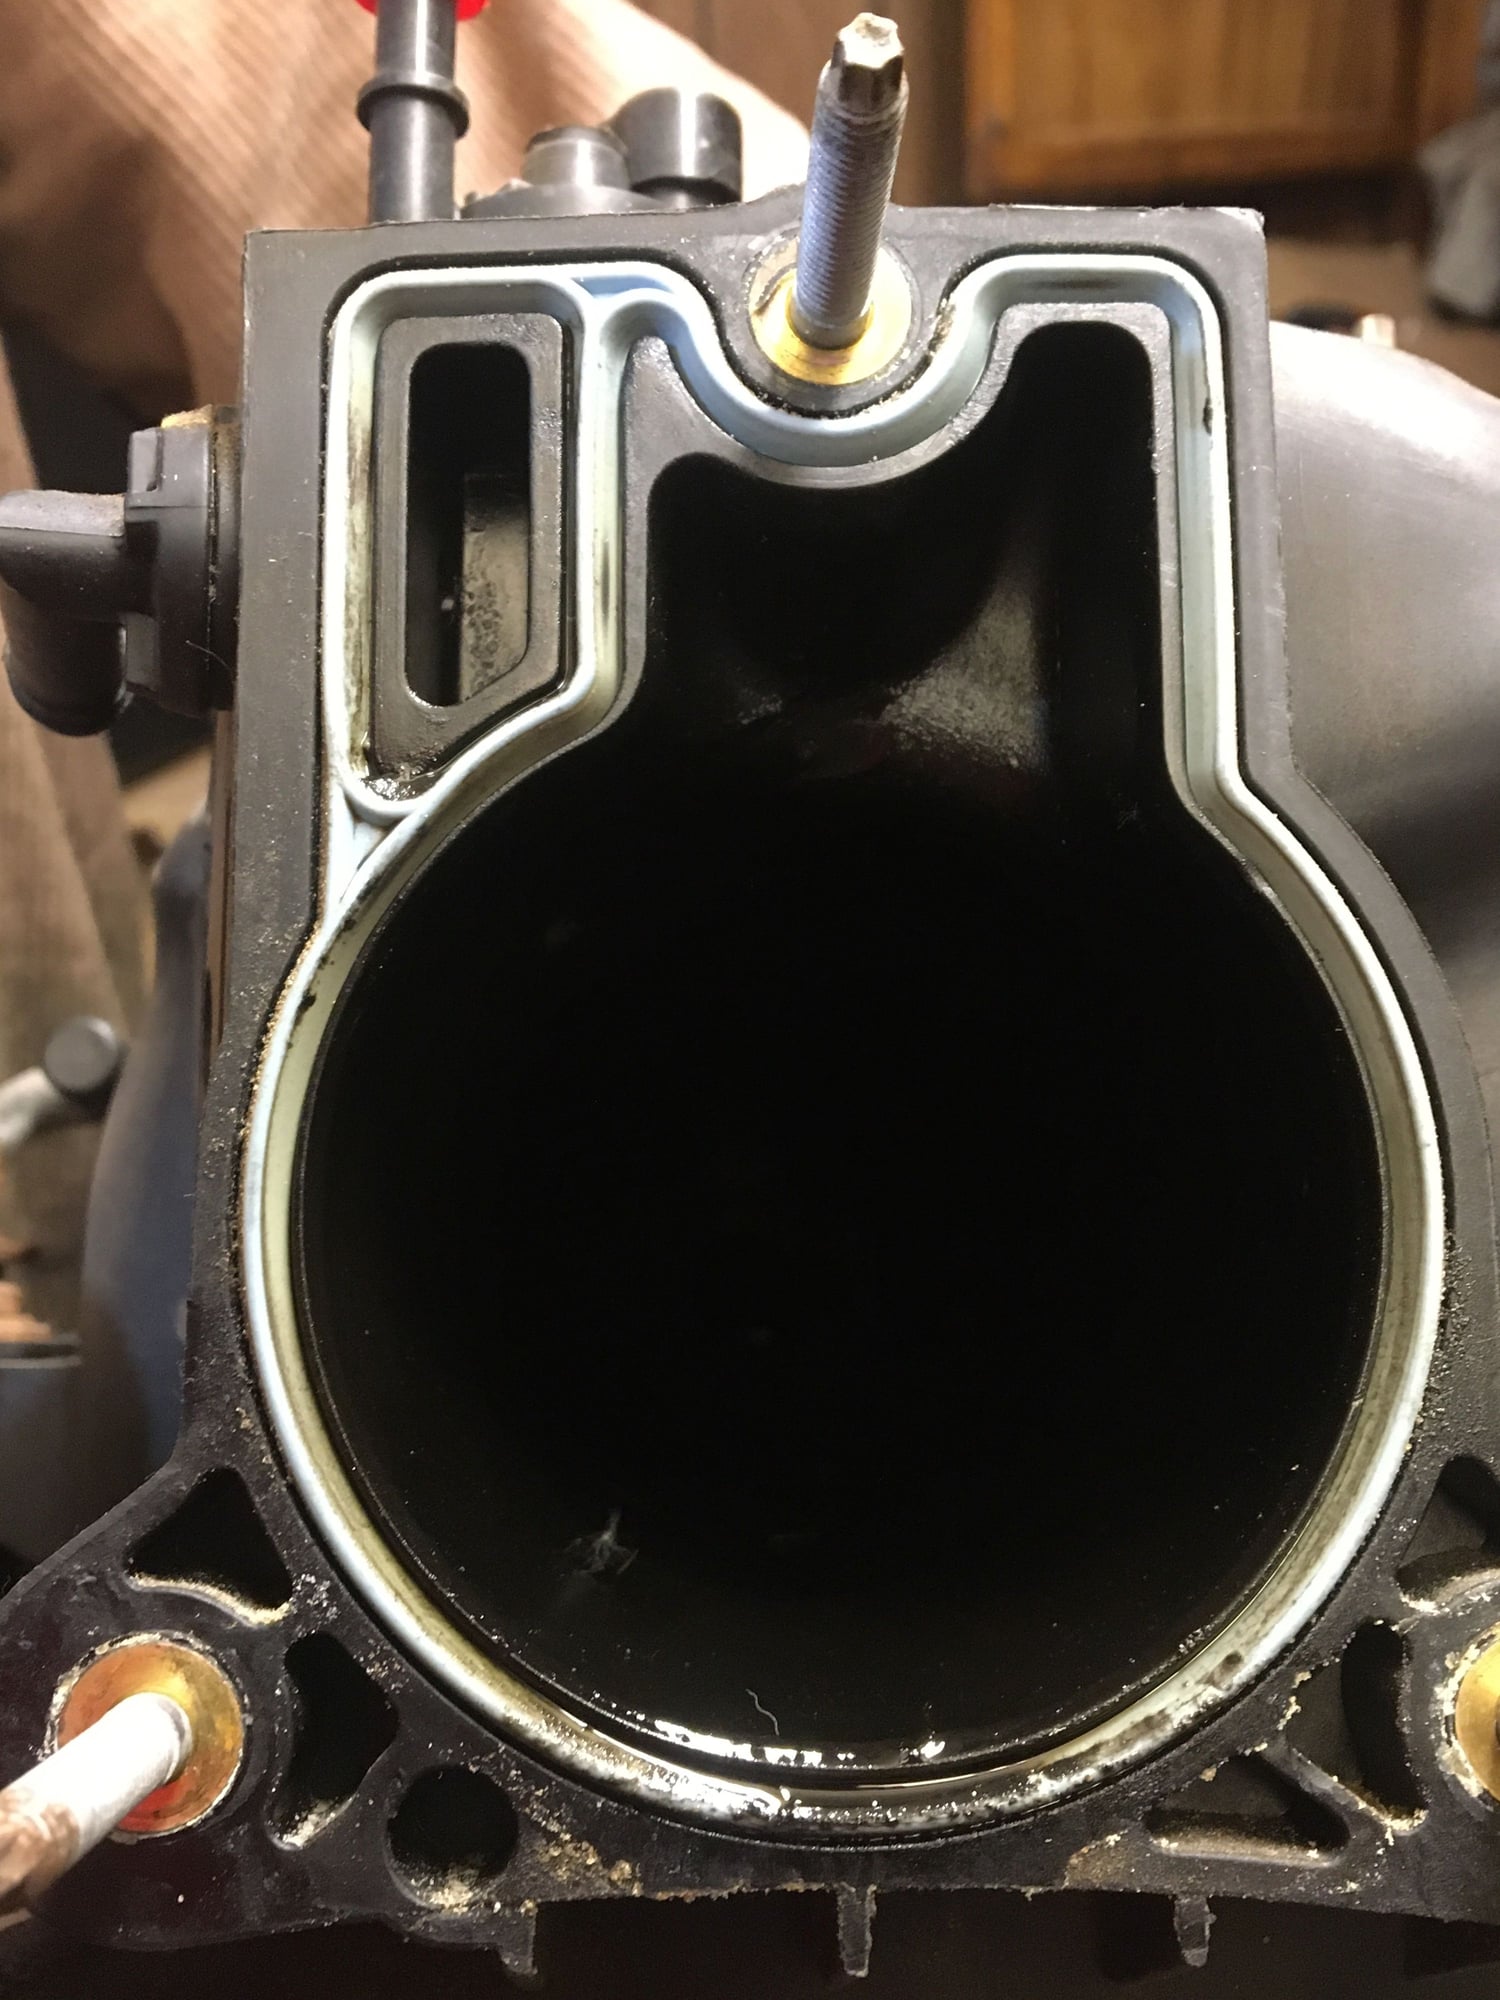 Engine - Intake/Fuel - GM Intake Manifold for 4.8L LR4, the 5.3L LM7, and 6.0L LQ4 - CATHEDRAL port - Used - Rome, NY 13440, United States